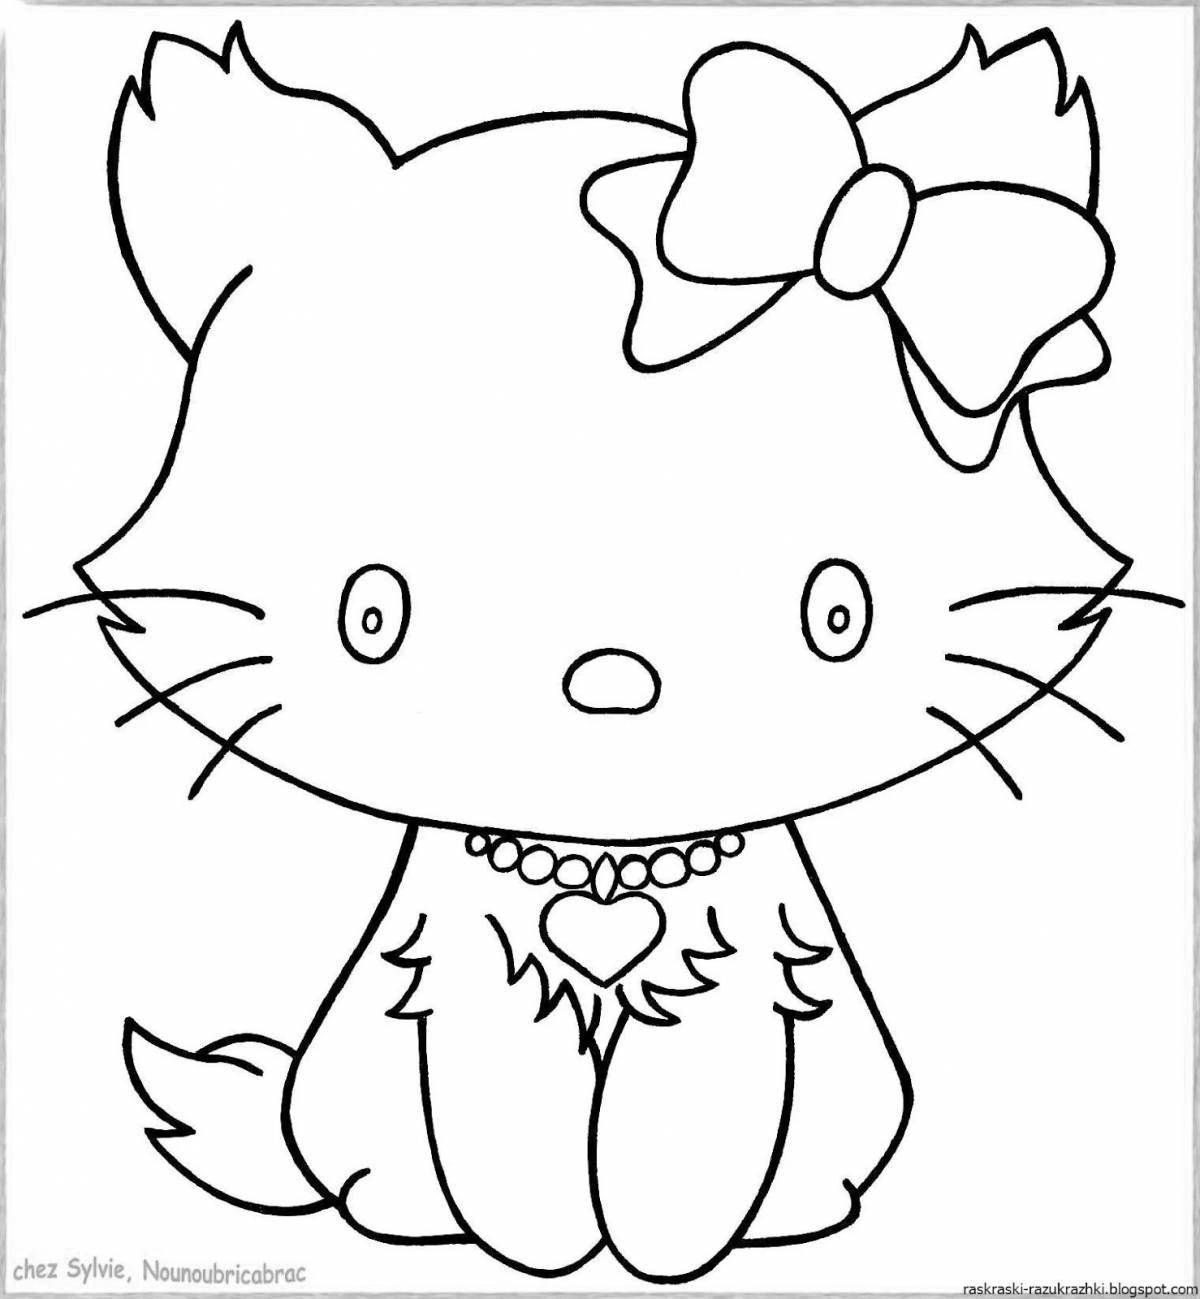 Cute coloring book for girls